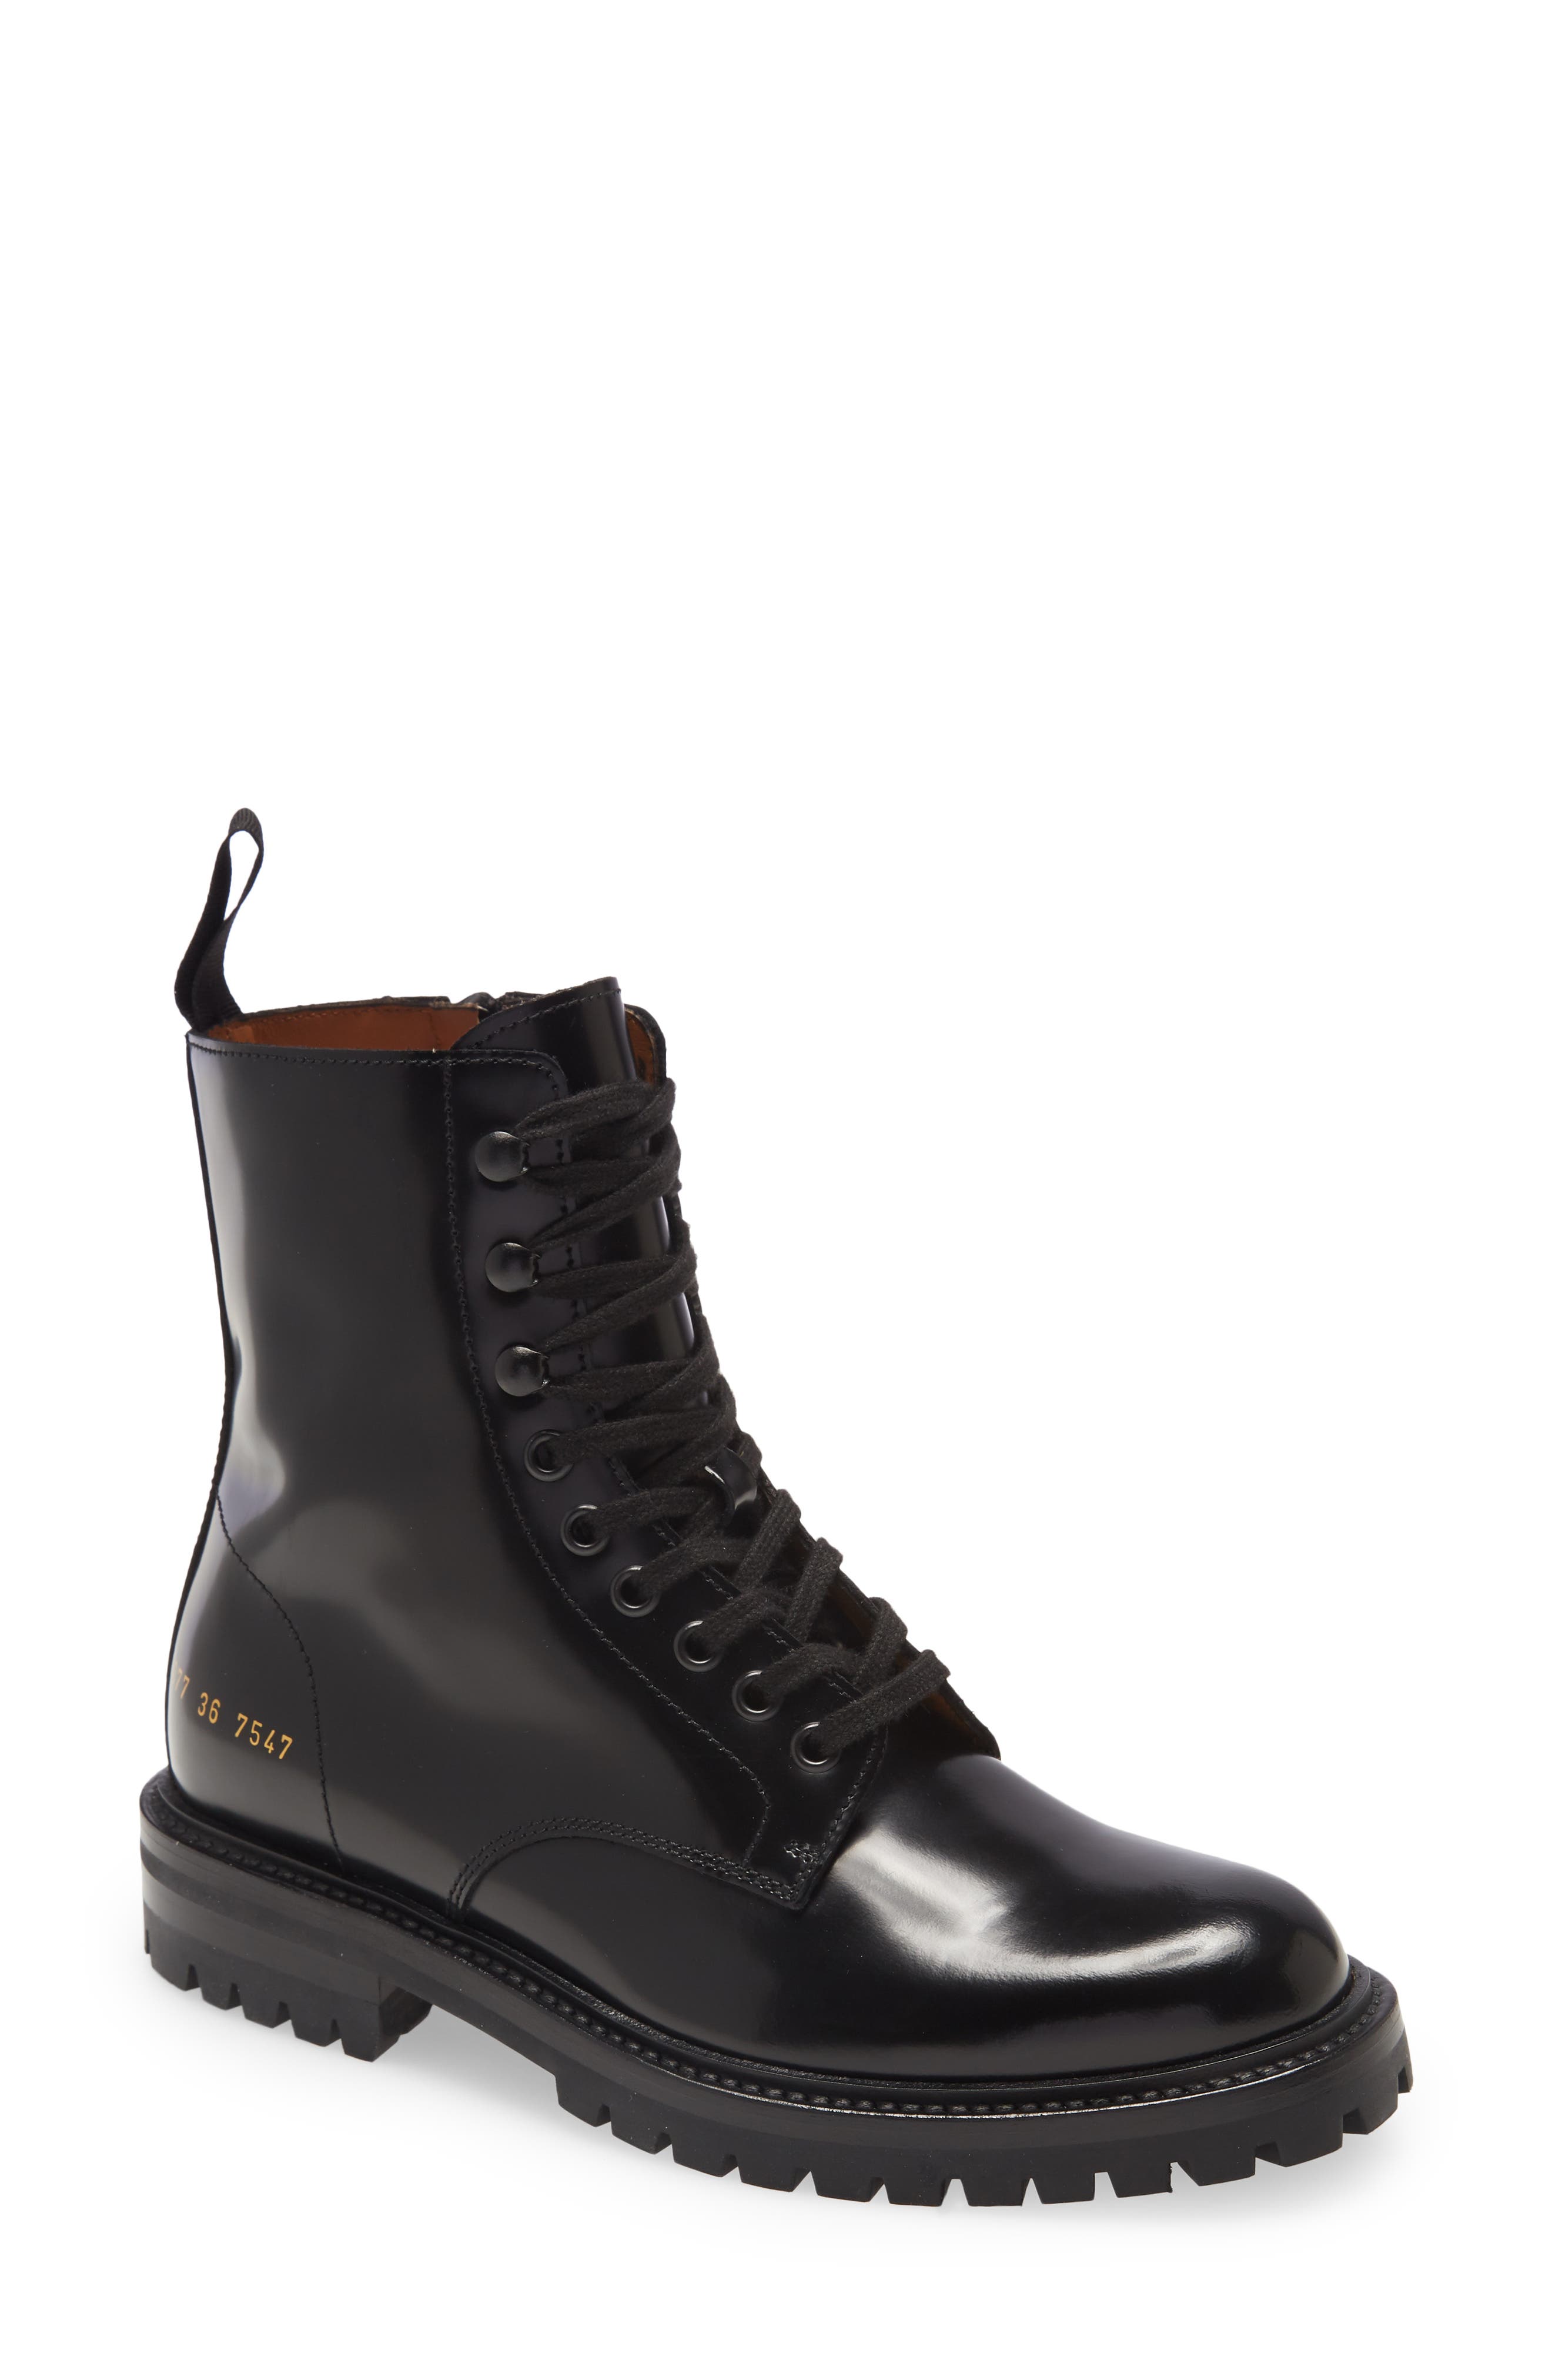 Common Projects Zipper Combat Boot in Black at Nordstrom, Size 6Us